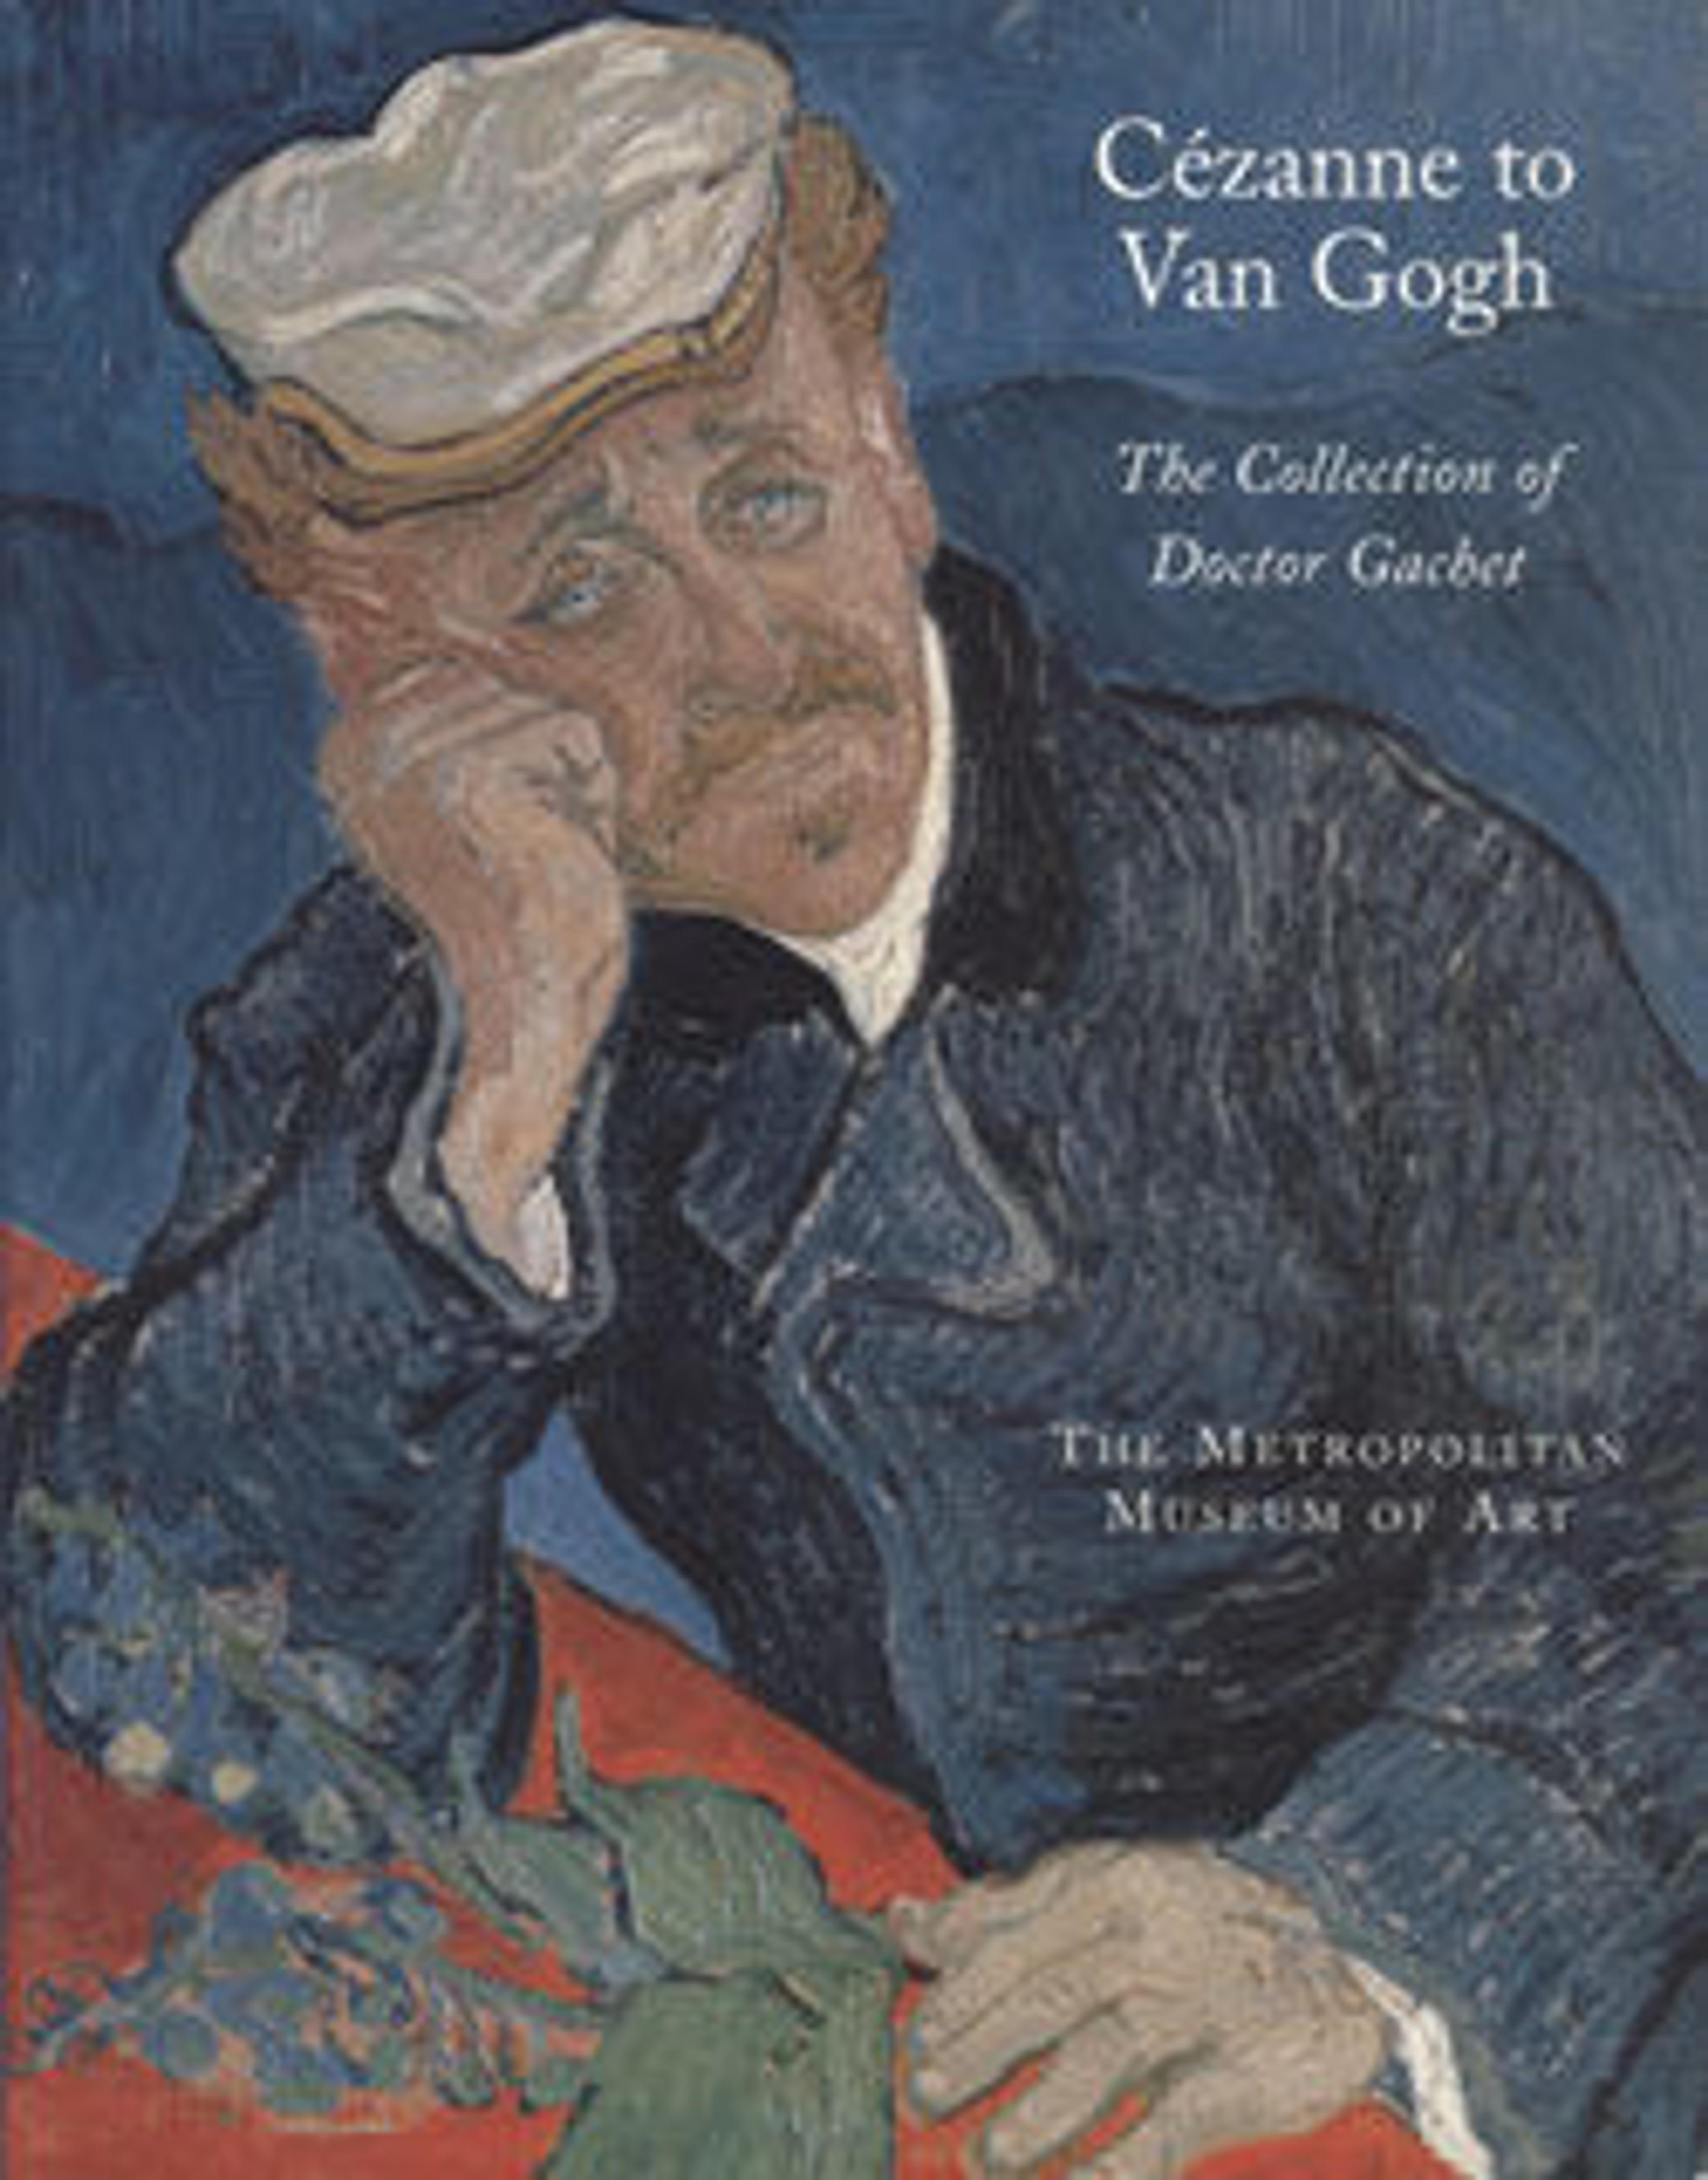 Cezanne to Van Gogh: The Collection of Doctor Gachet